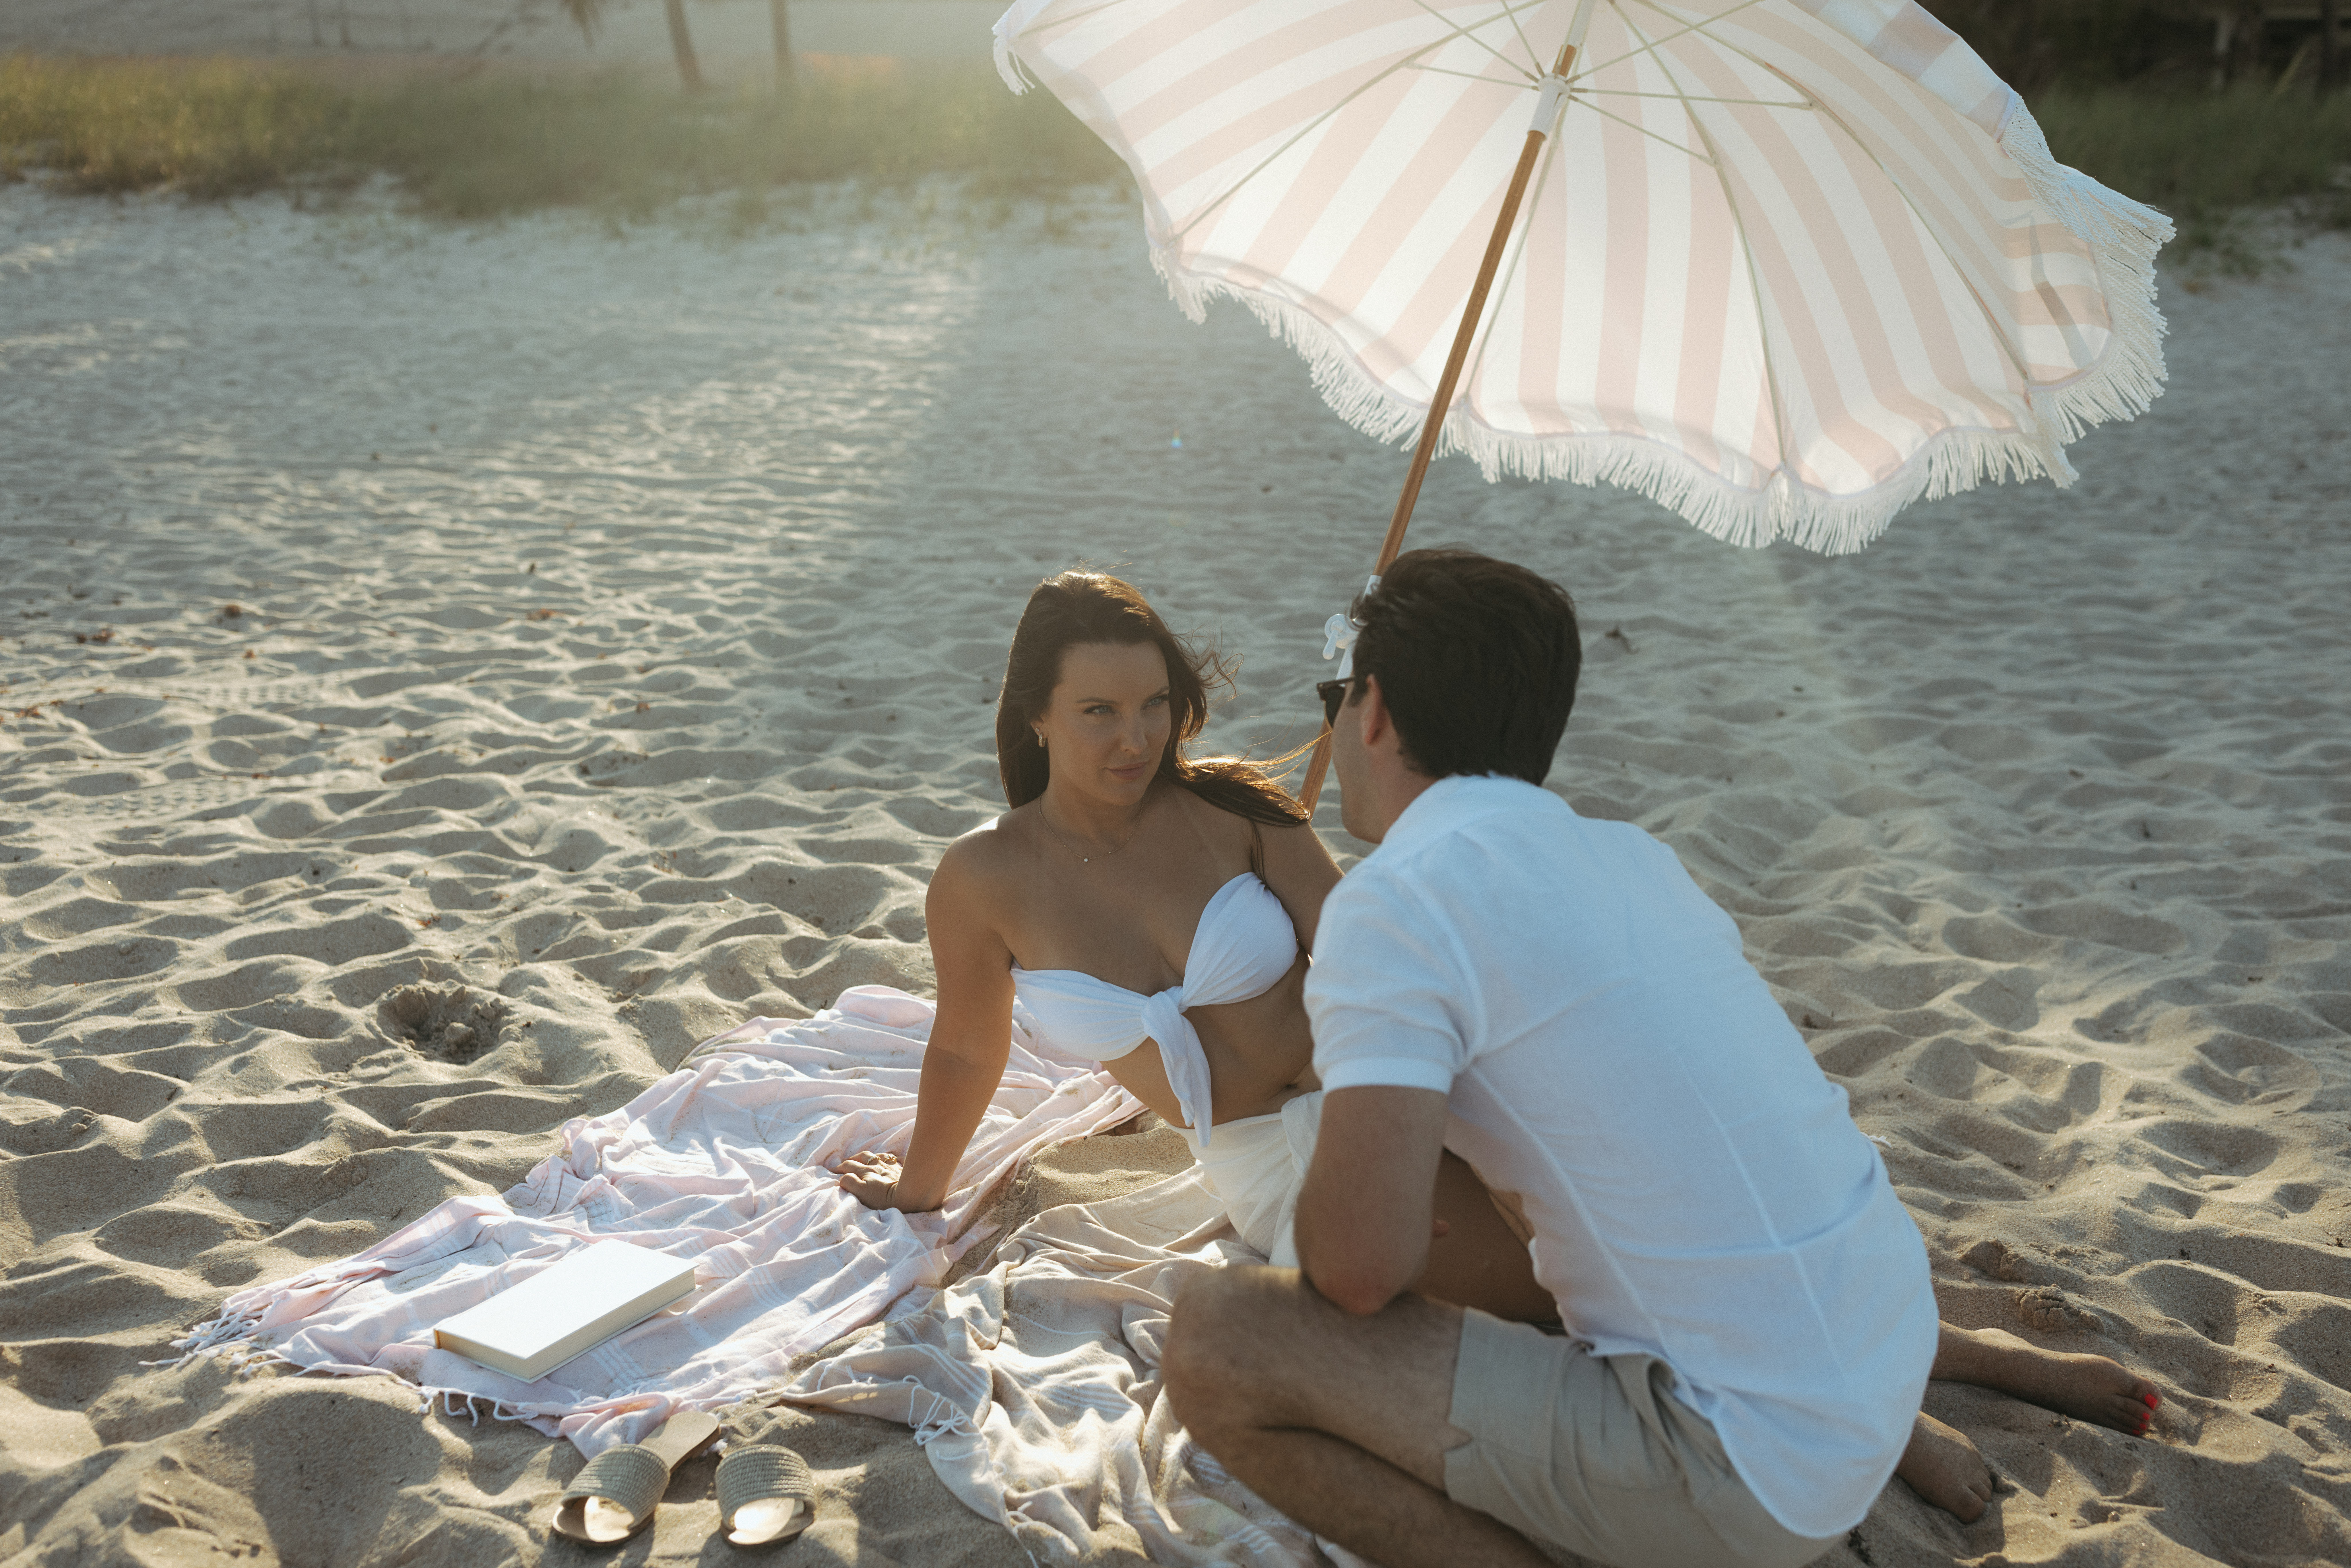 An Vintage-Inspired Engagement Session on the Beaches of Florida